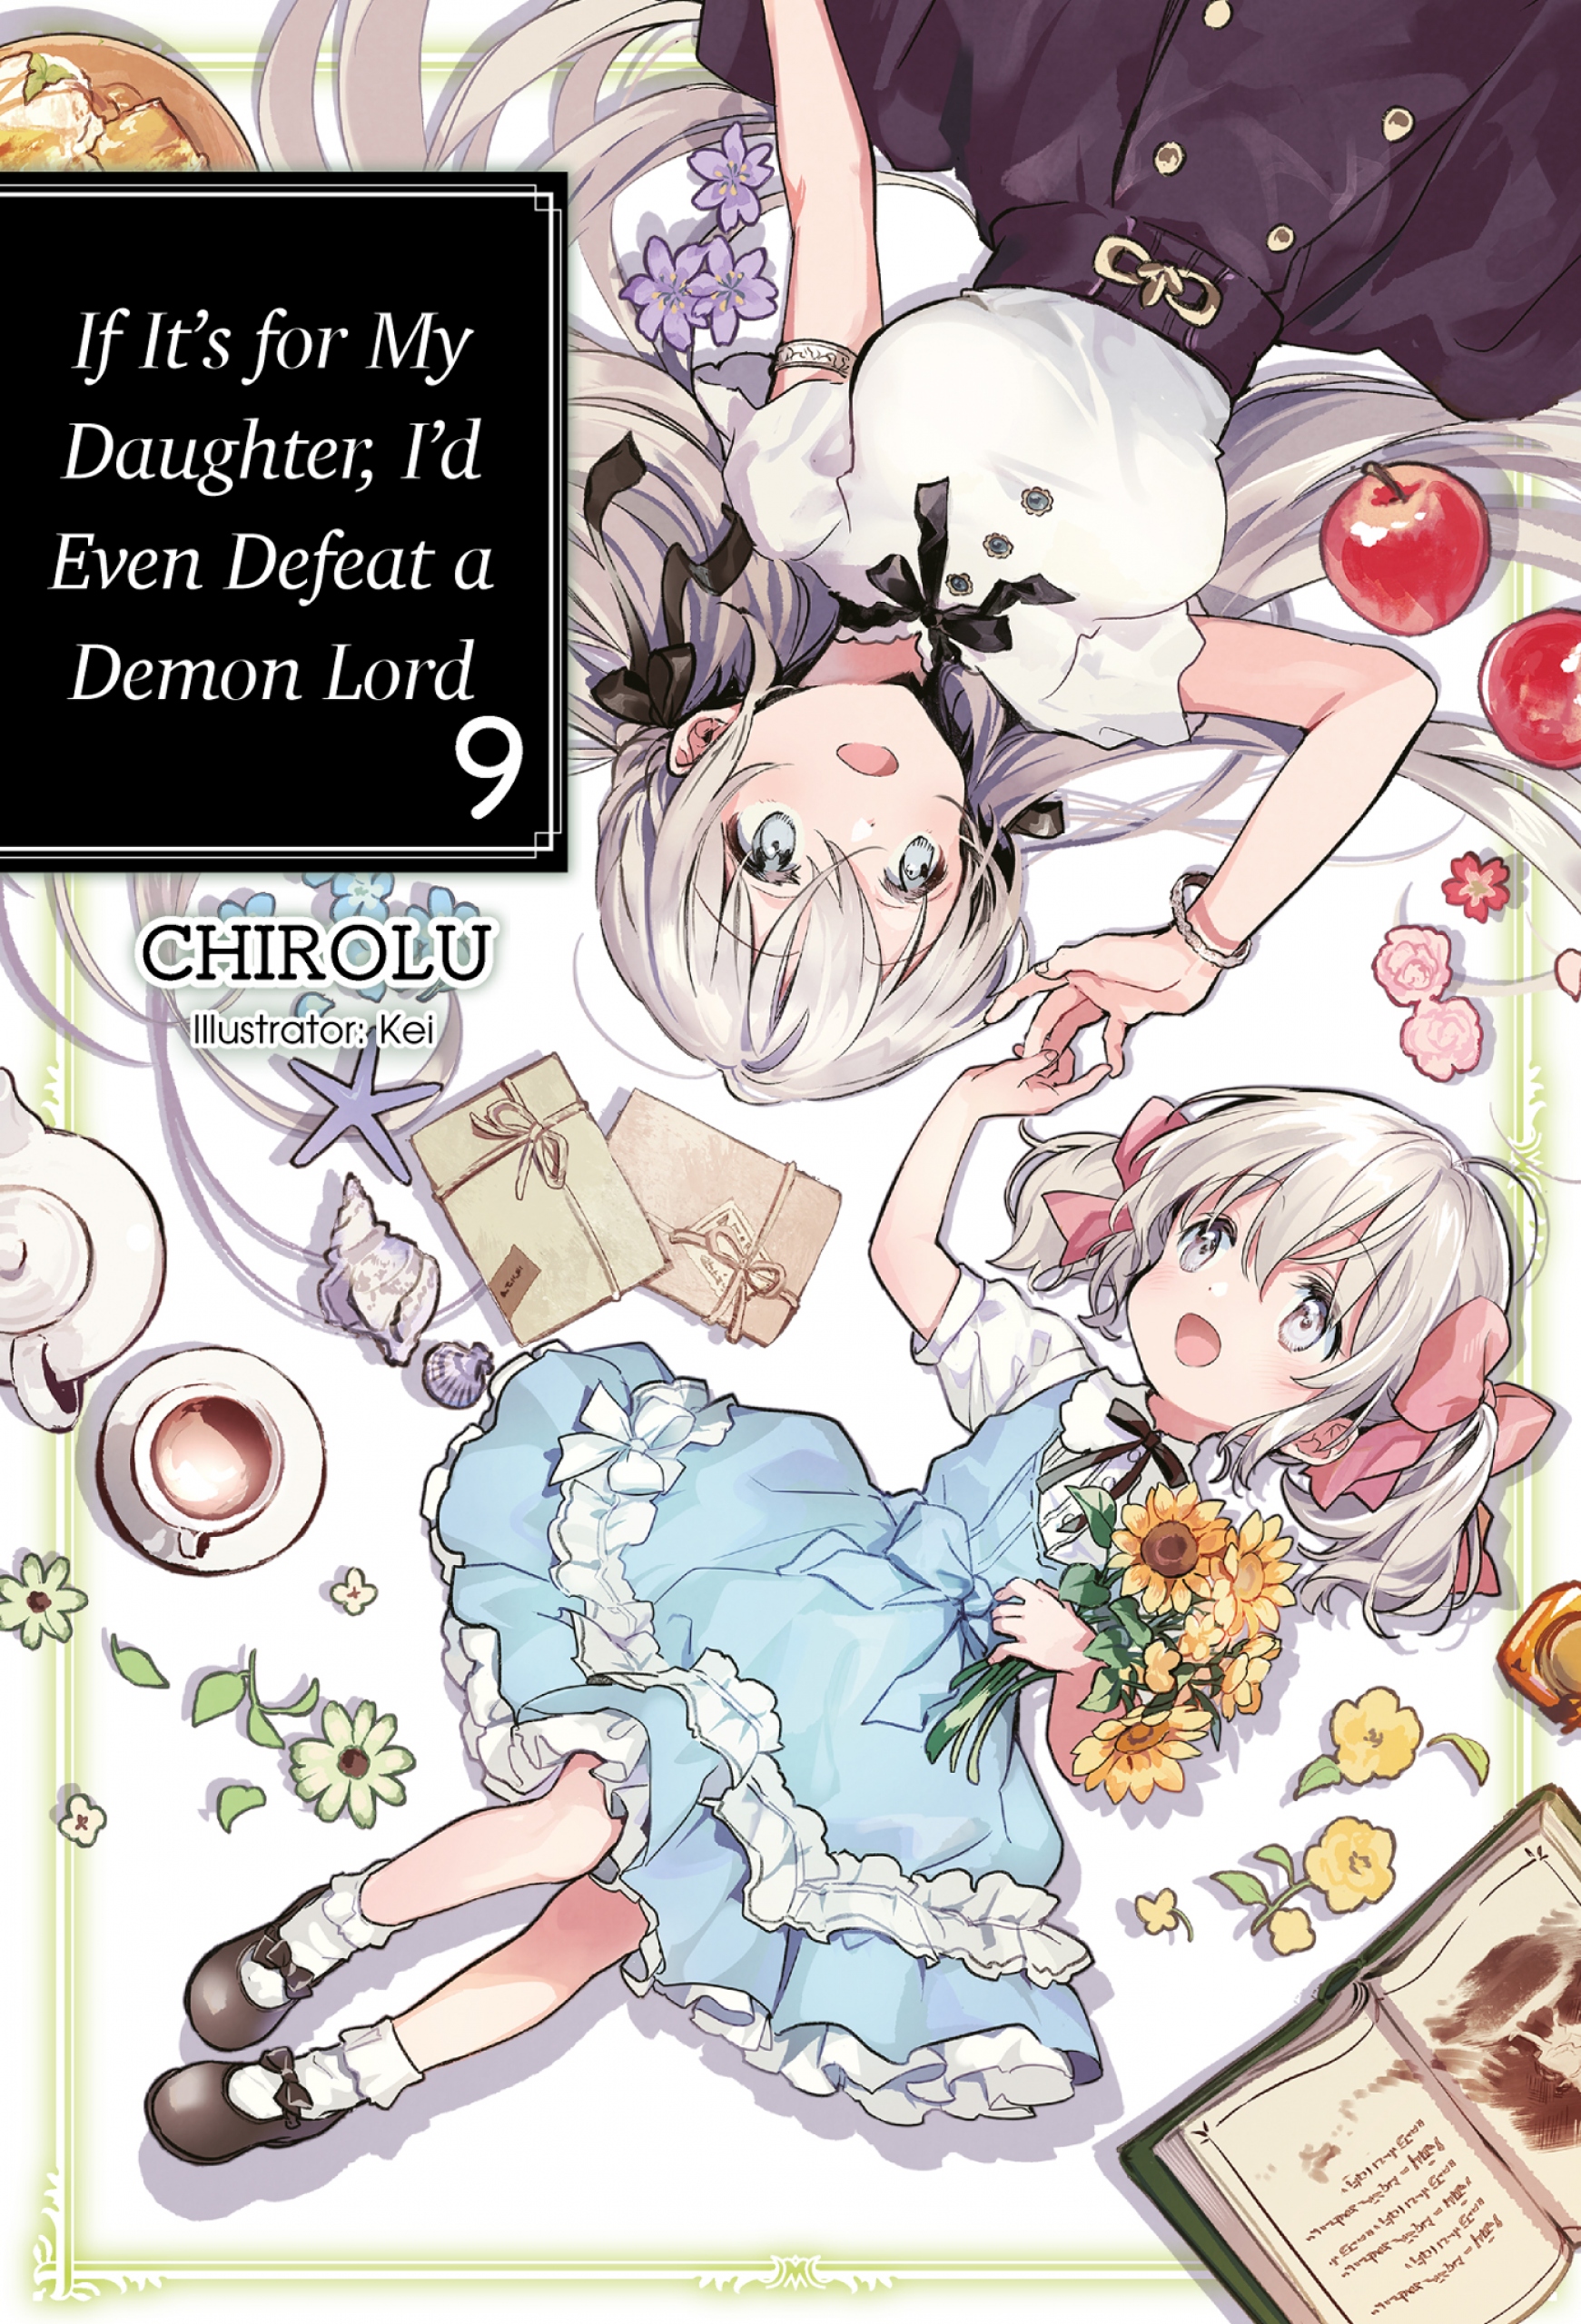 If It’s for My Daughter, I’d Even Defeat a Demon Lord: Volume 9